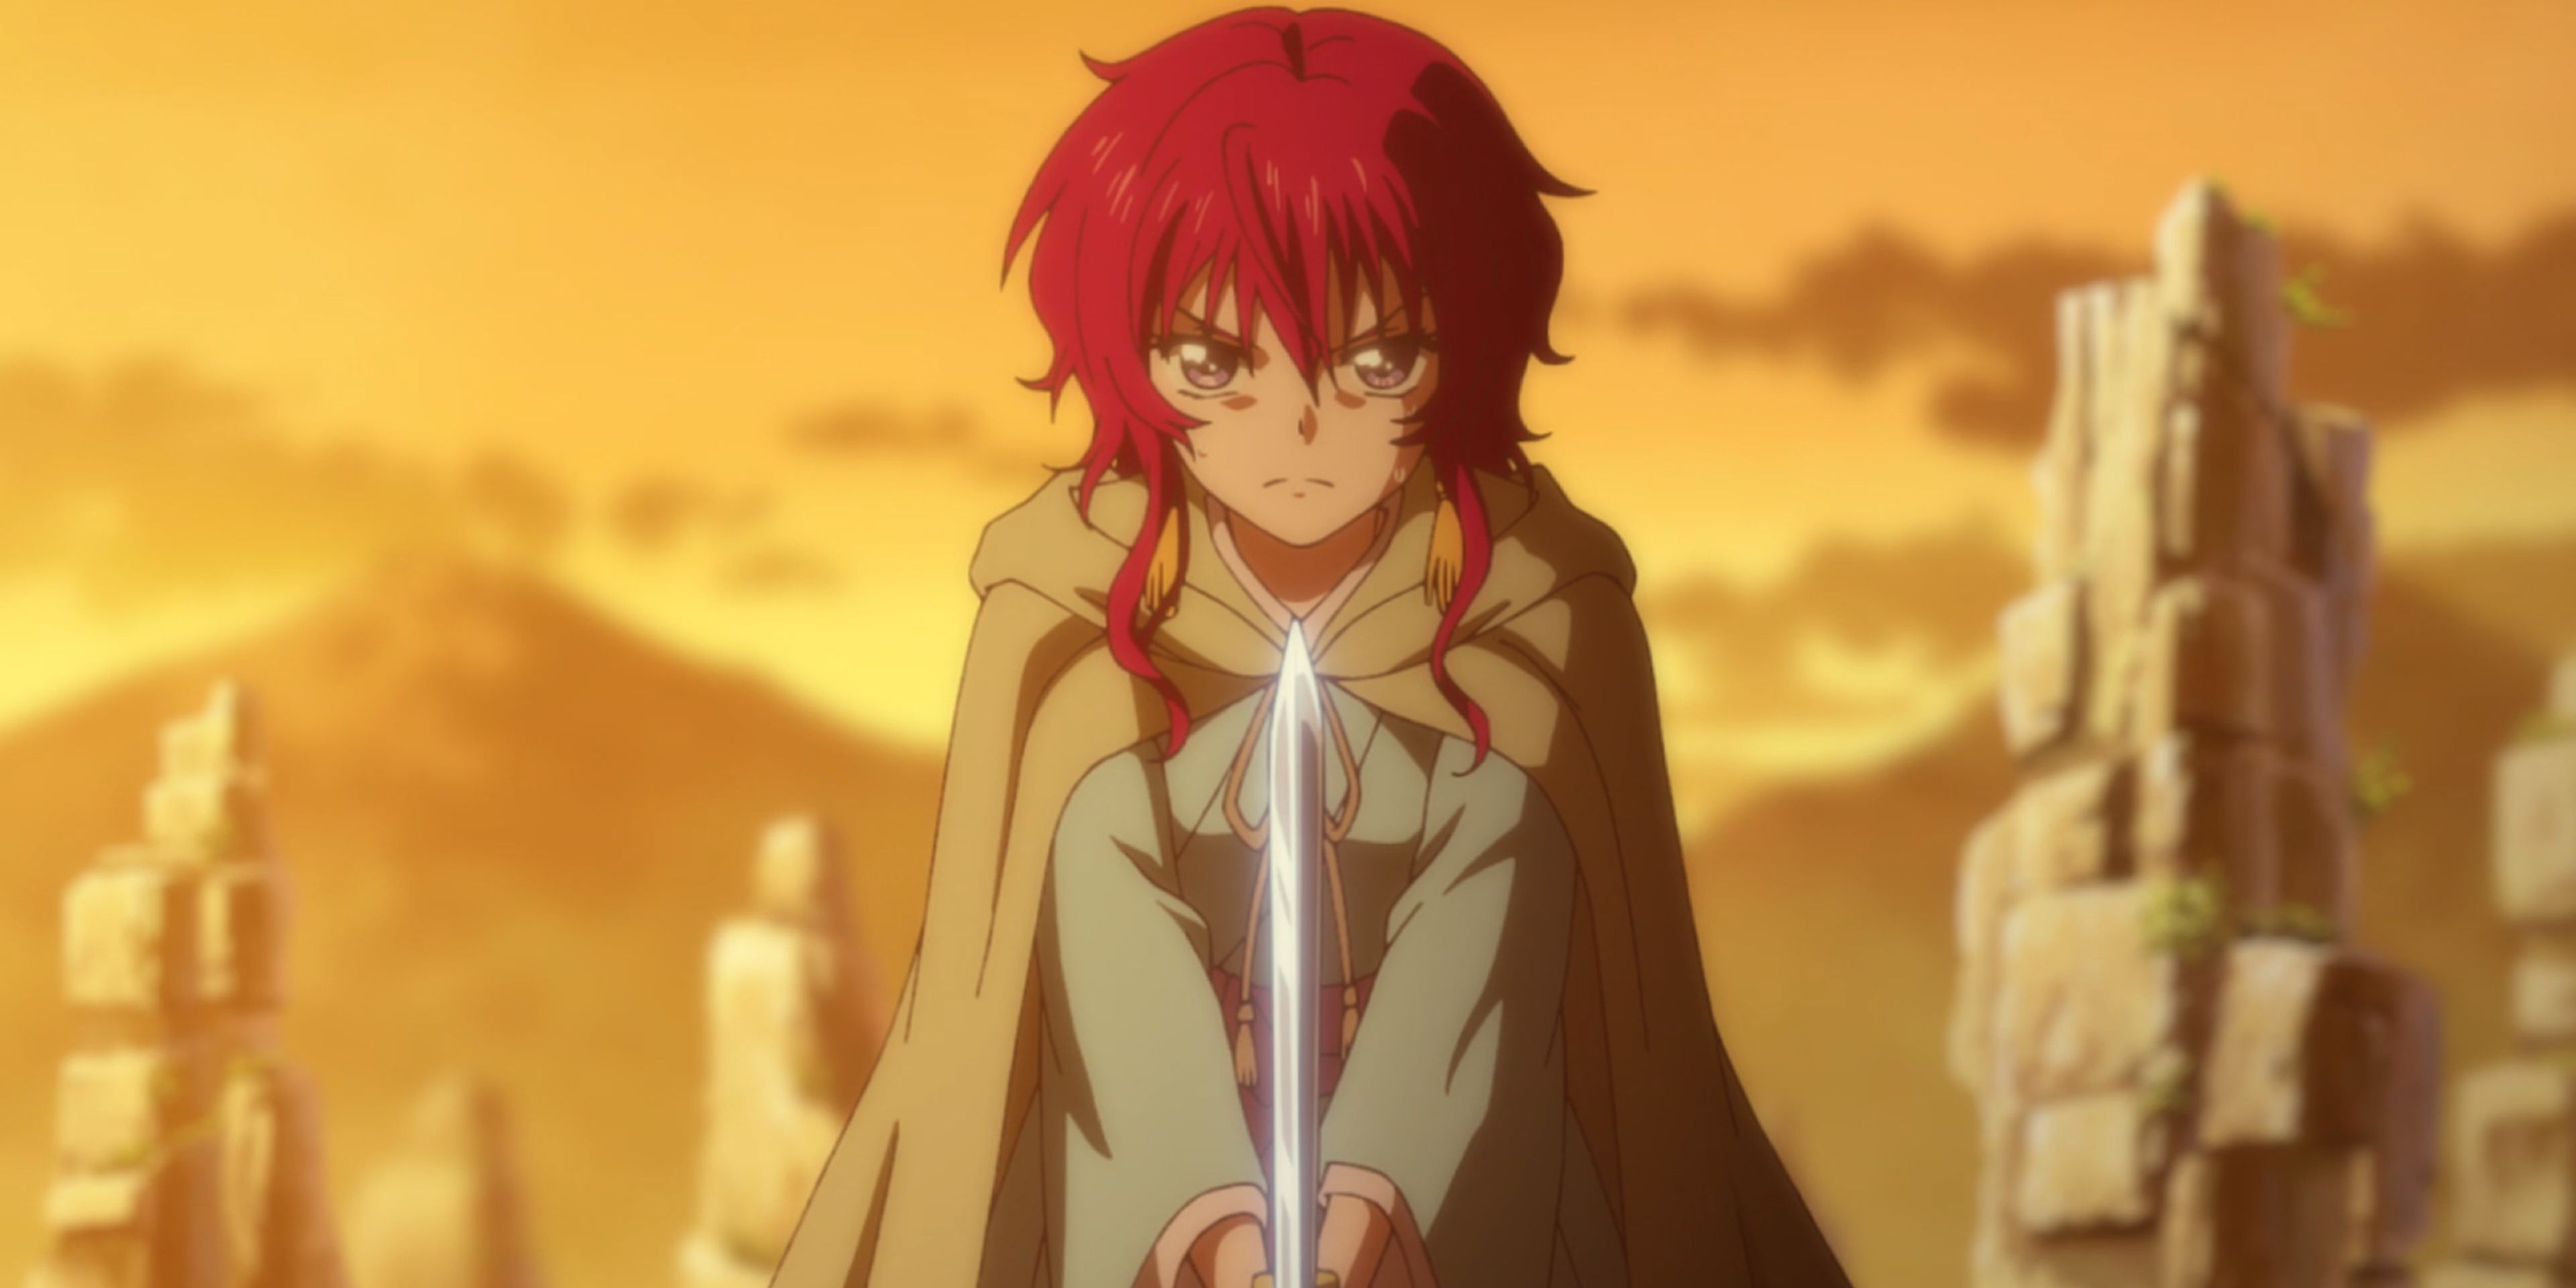 Yona From Yona of The Dawn Picking Up A Sword